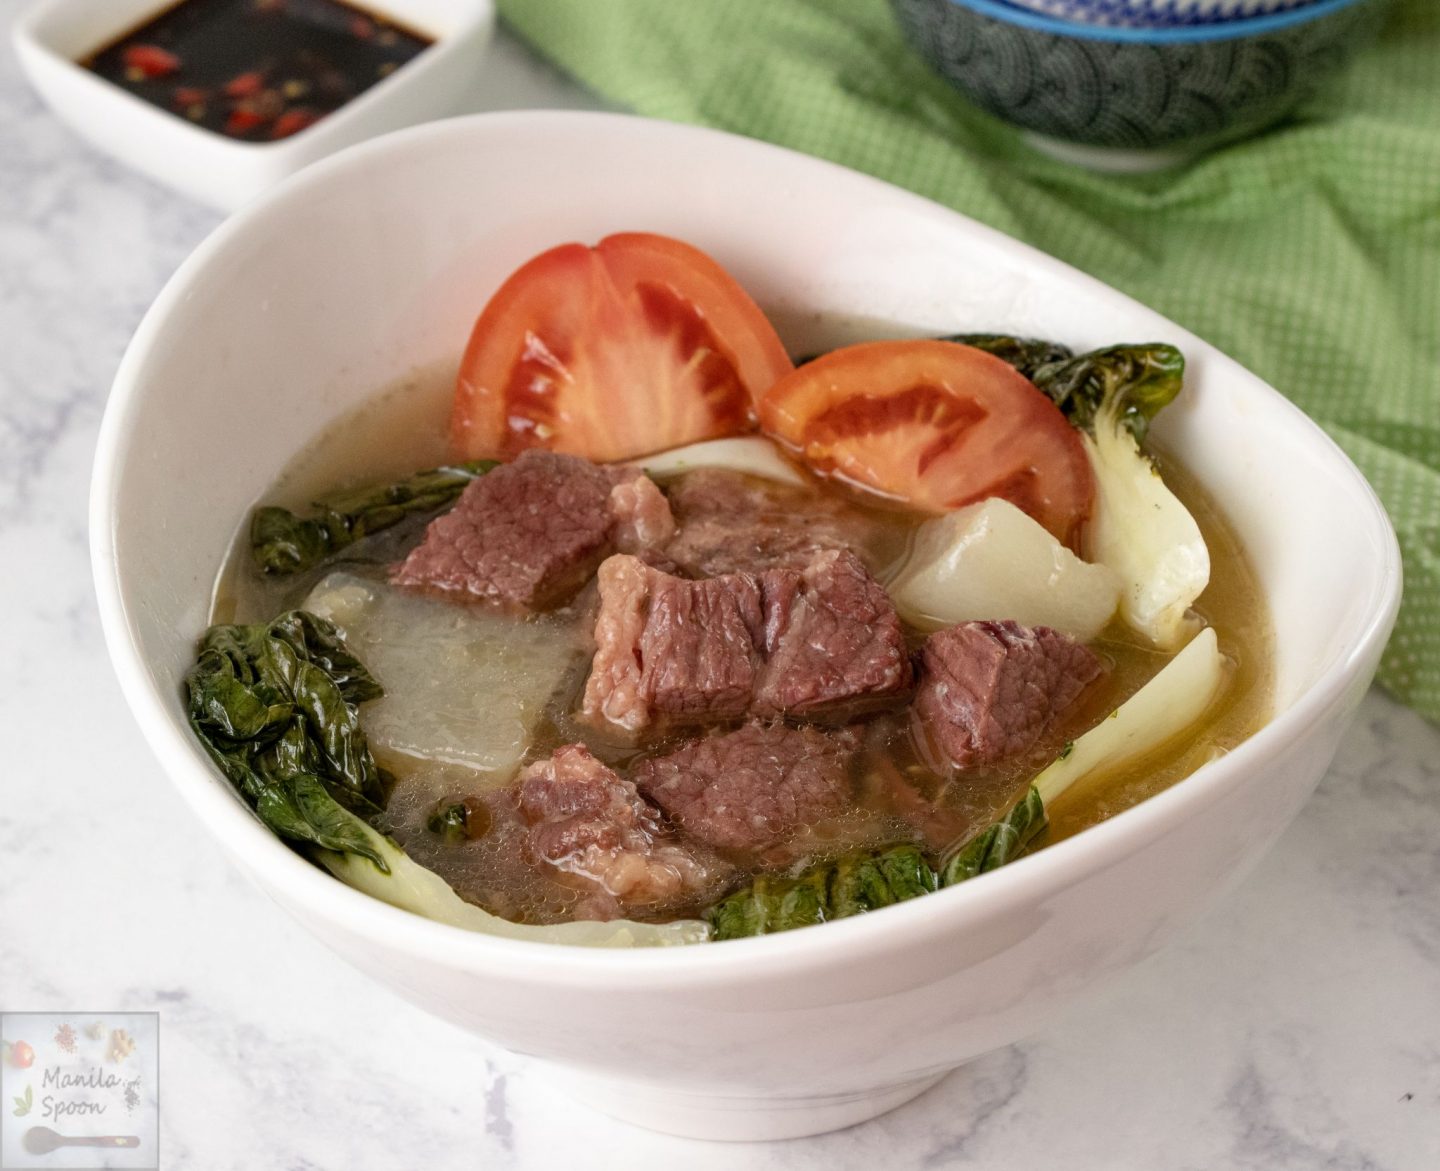 This has now become a classic favorite in my household. Use your corned beef and turn it into this delicious and hearty soup loaded with vegetables with a tangy mouth-puckering flavor that would leave your tastebuds asking for more! Made even easier in the Instant Pot - this Sinigang na Corned Beef (Corned Beef Sour Soup) produces a melt-in-your-mouth tender beef that is oh-so-good!